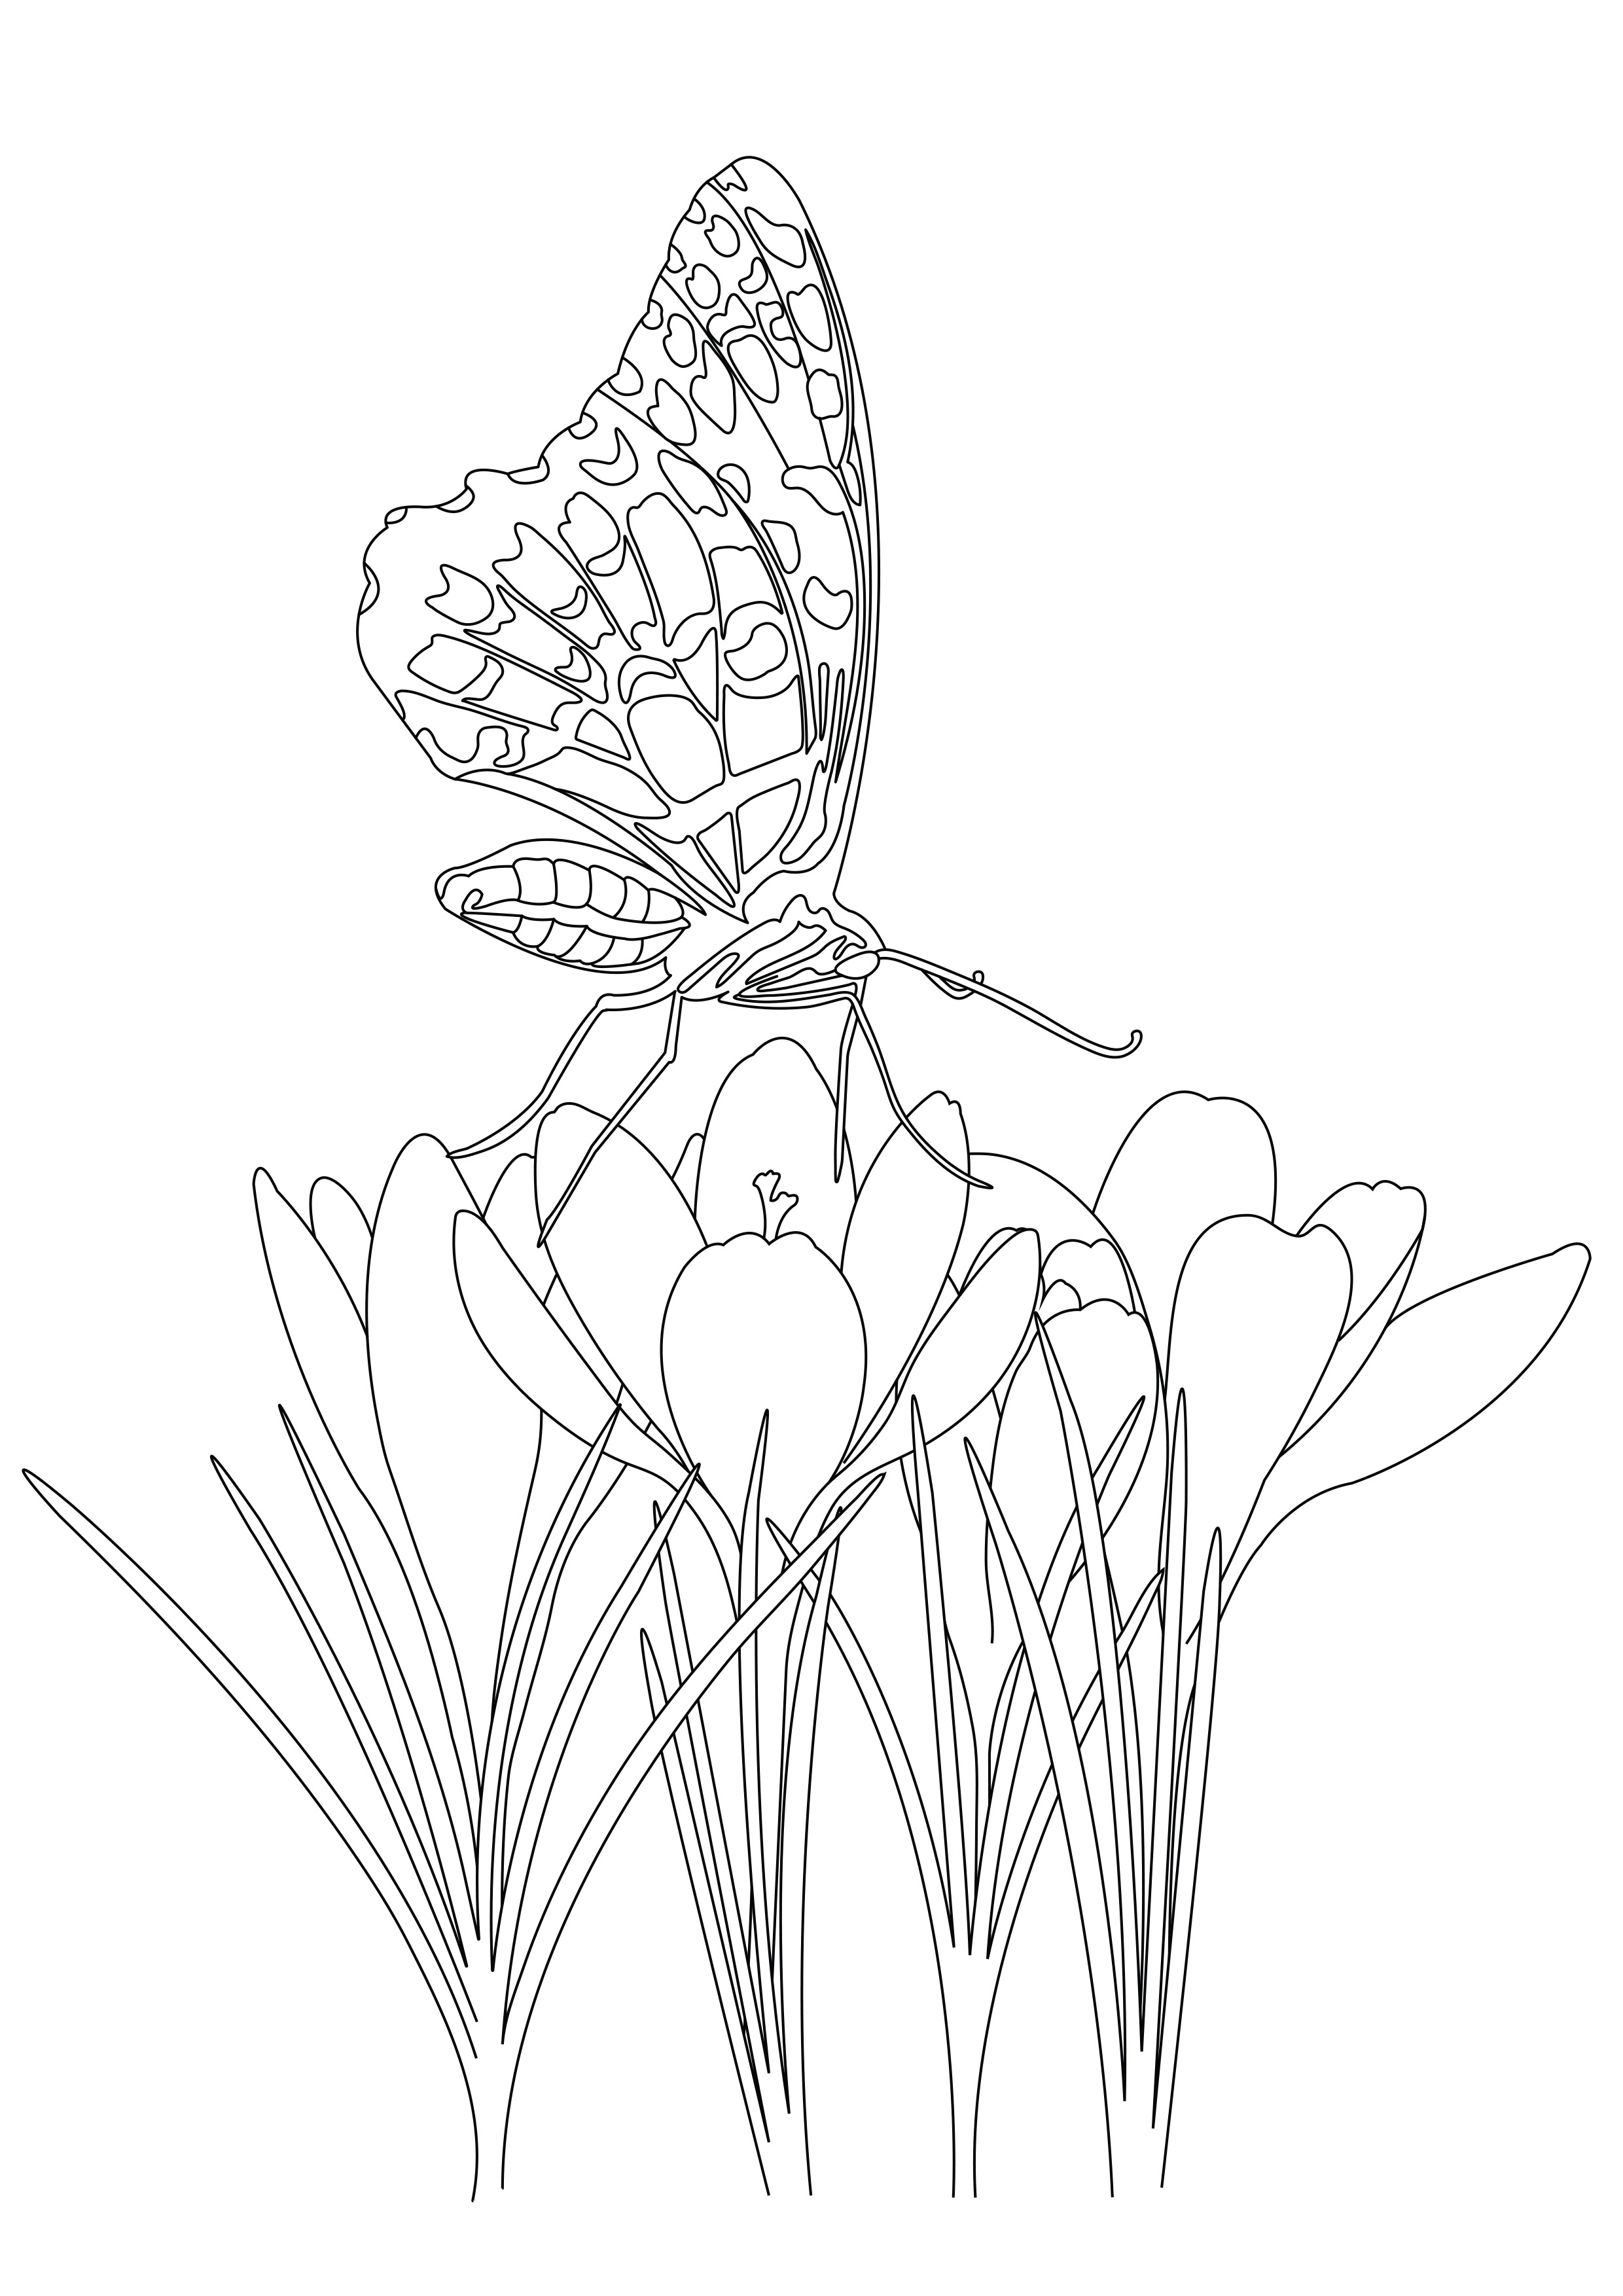 Butterfly under flowers, from the coloring book 'Butterfly garden', by Emma L Williams, Artist : Emma L Williams